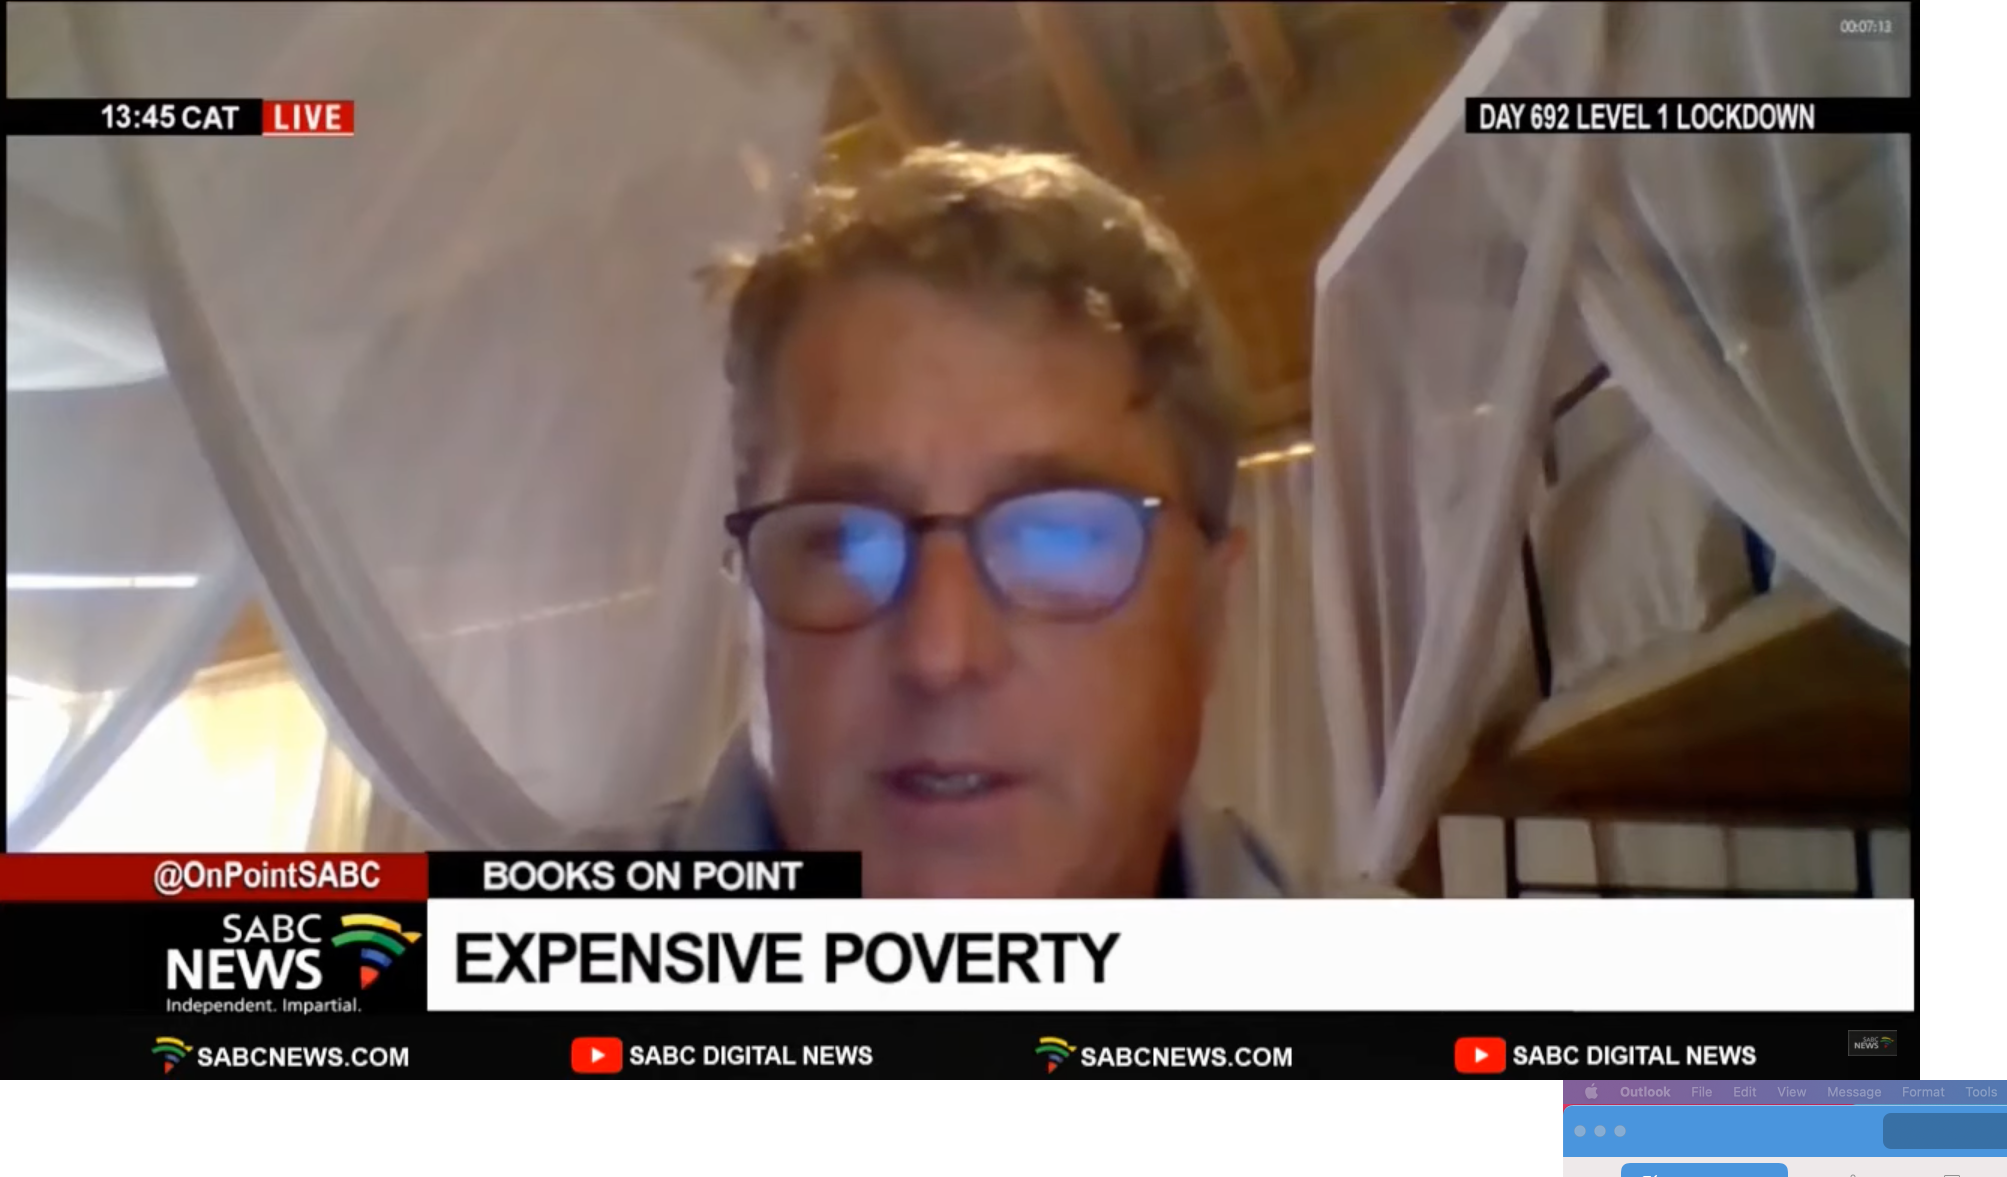 Books on Point | Expensive Poverty: Author Greg Mills 